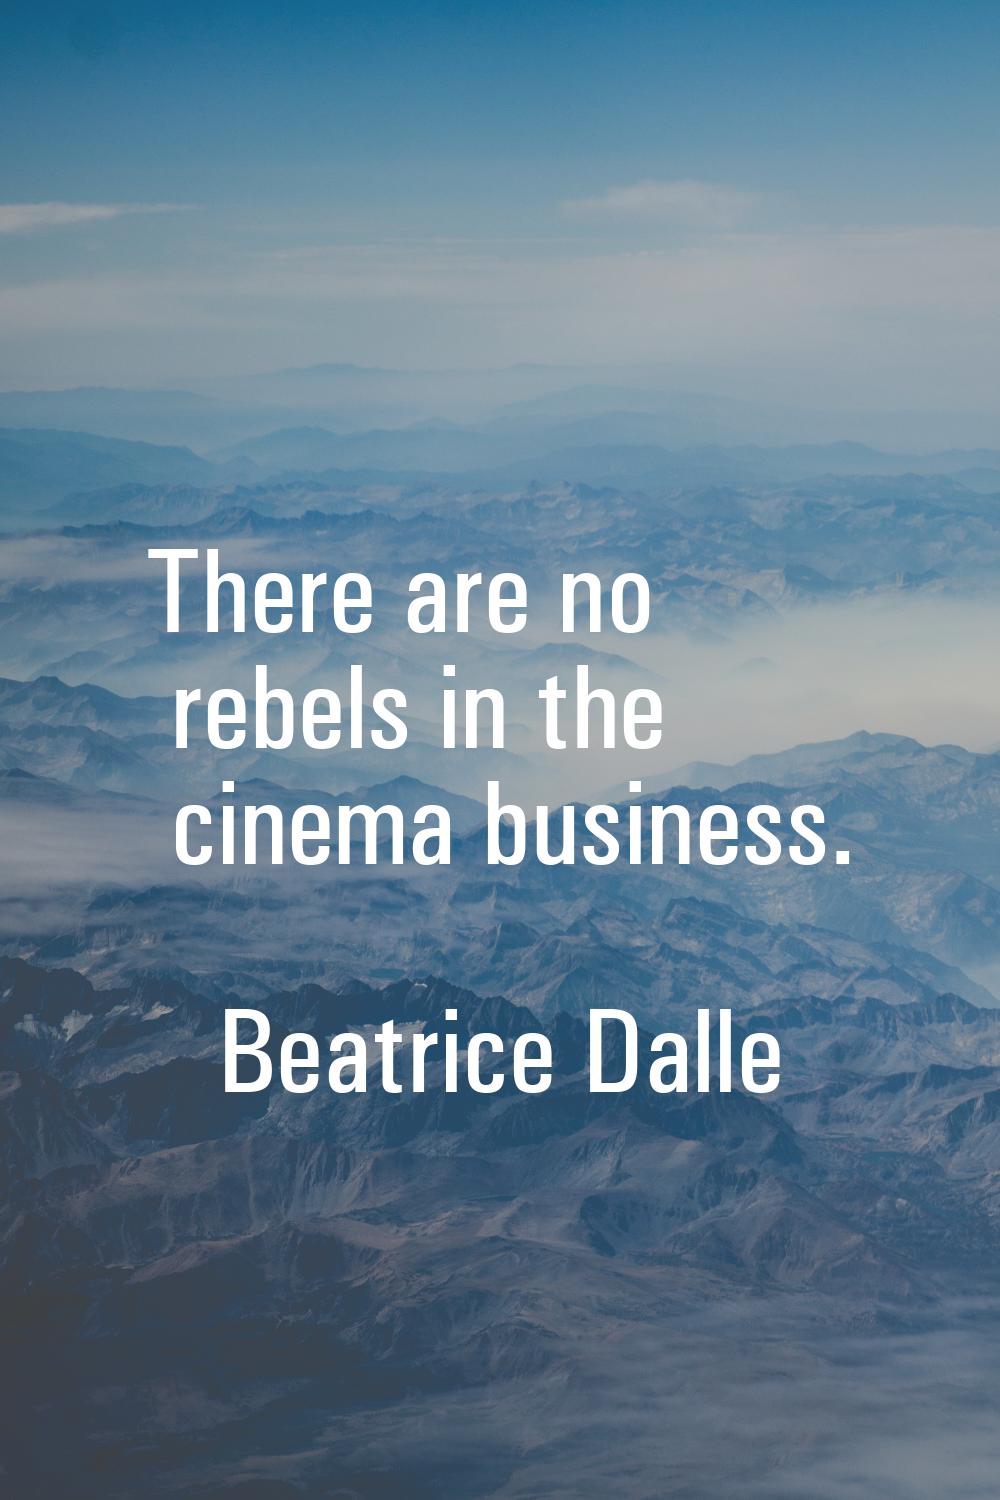 There are no rebels in the cinema business.